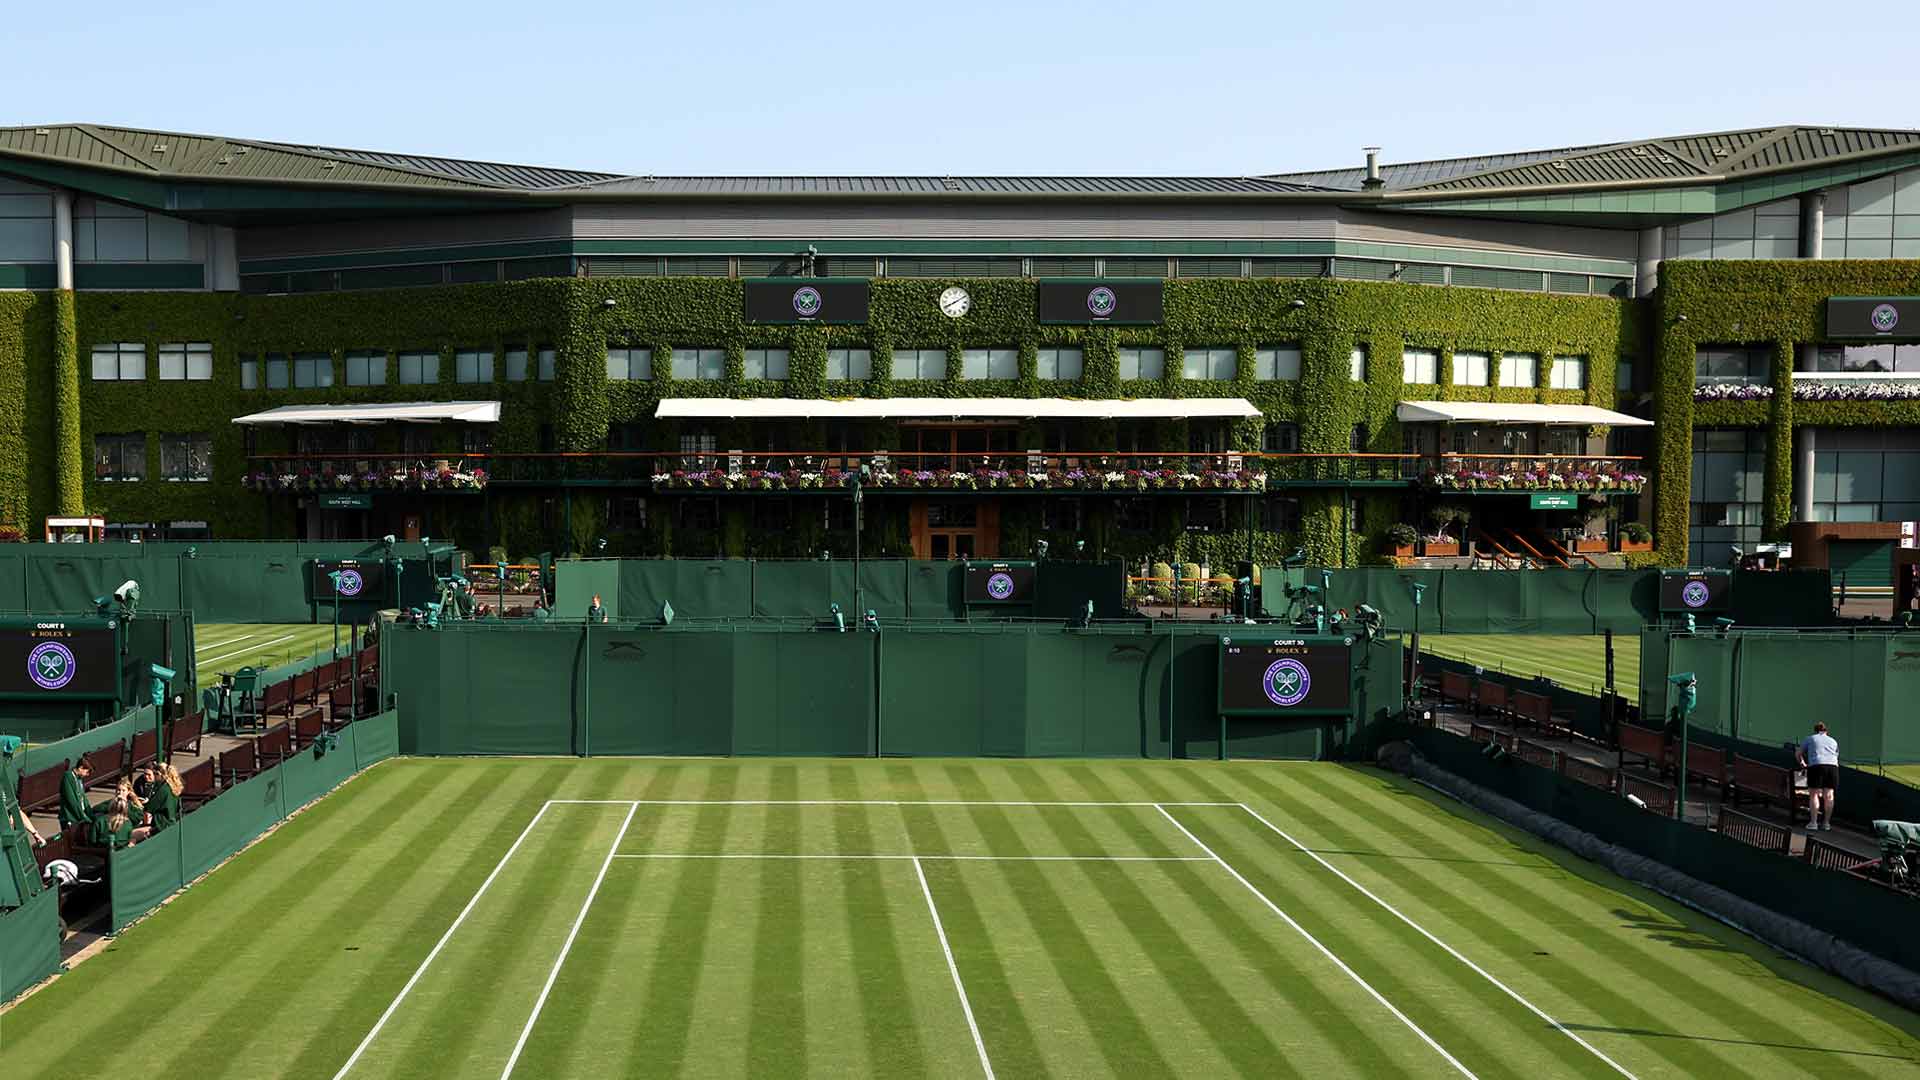 The first-round action at Wimbledon has resumed after a rain delay on Monday afternoon.